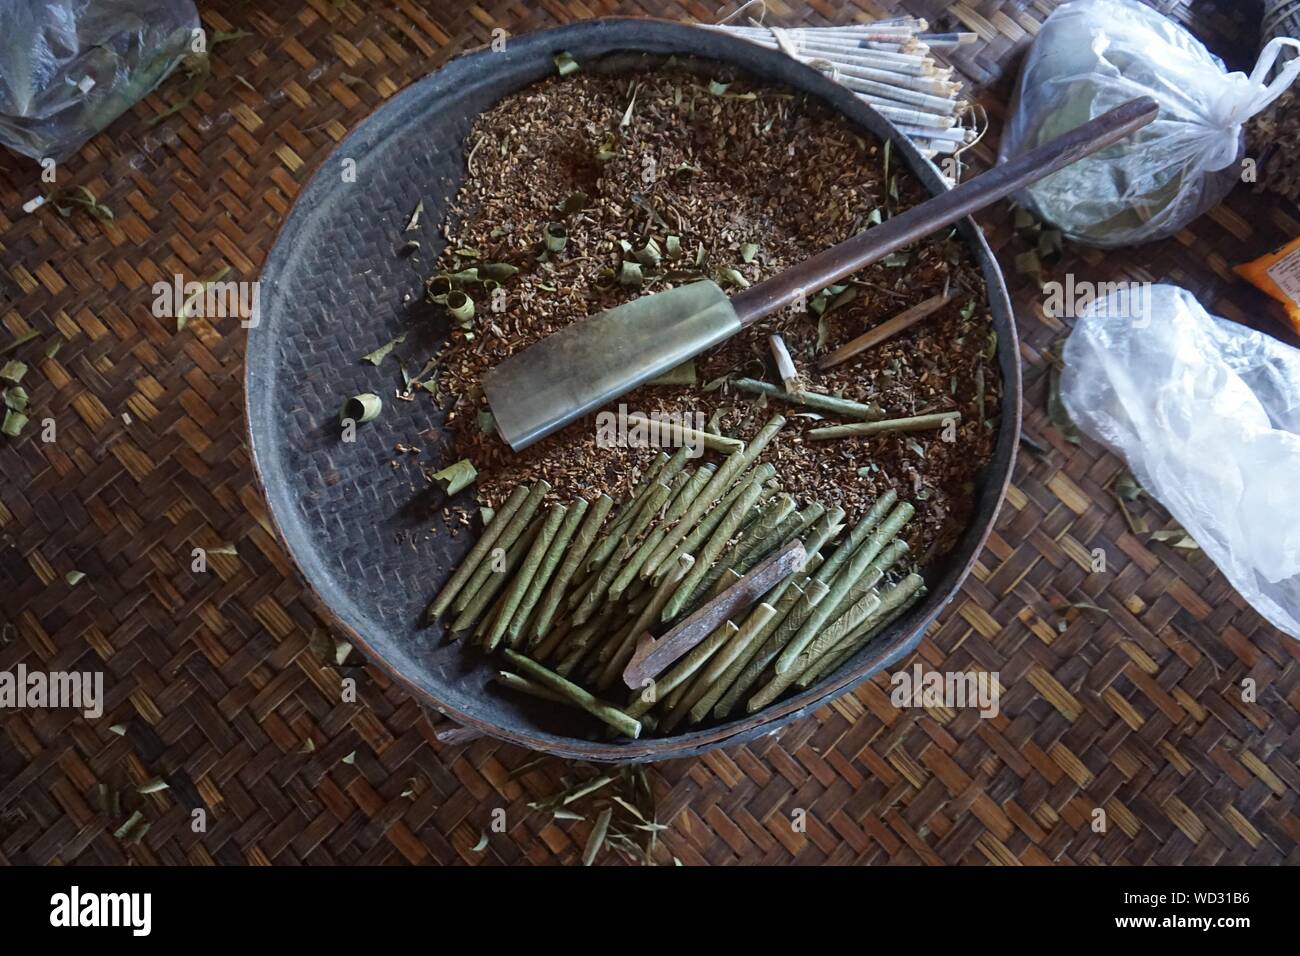 High Angle View Of Rolled Up Leaves With Tabacco Stock Photo